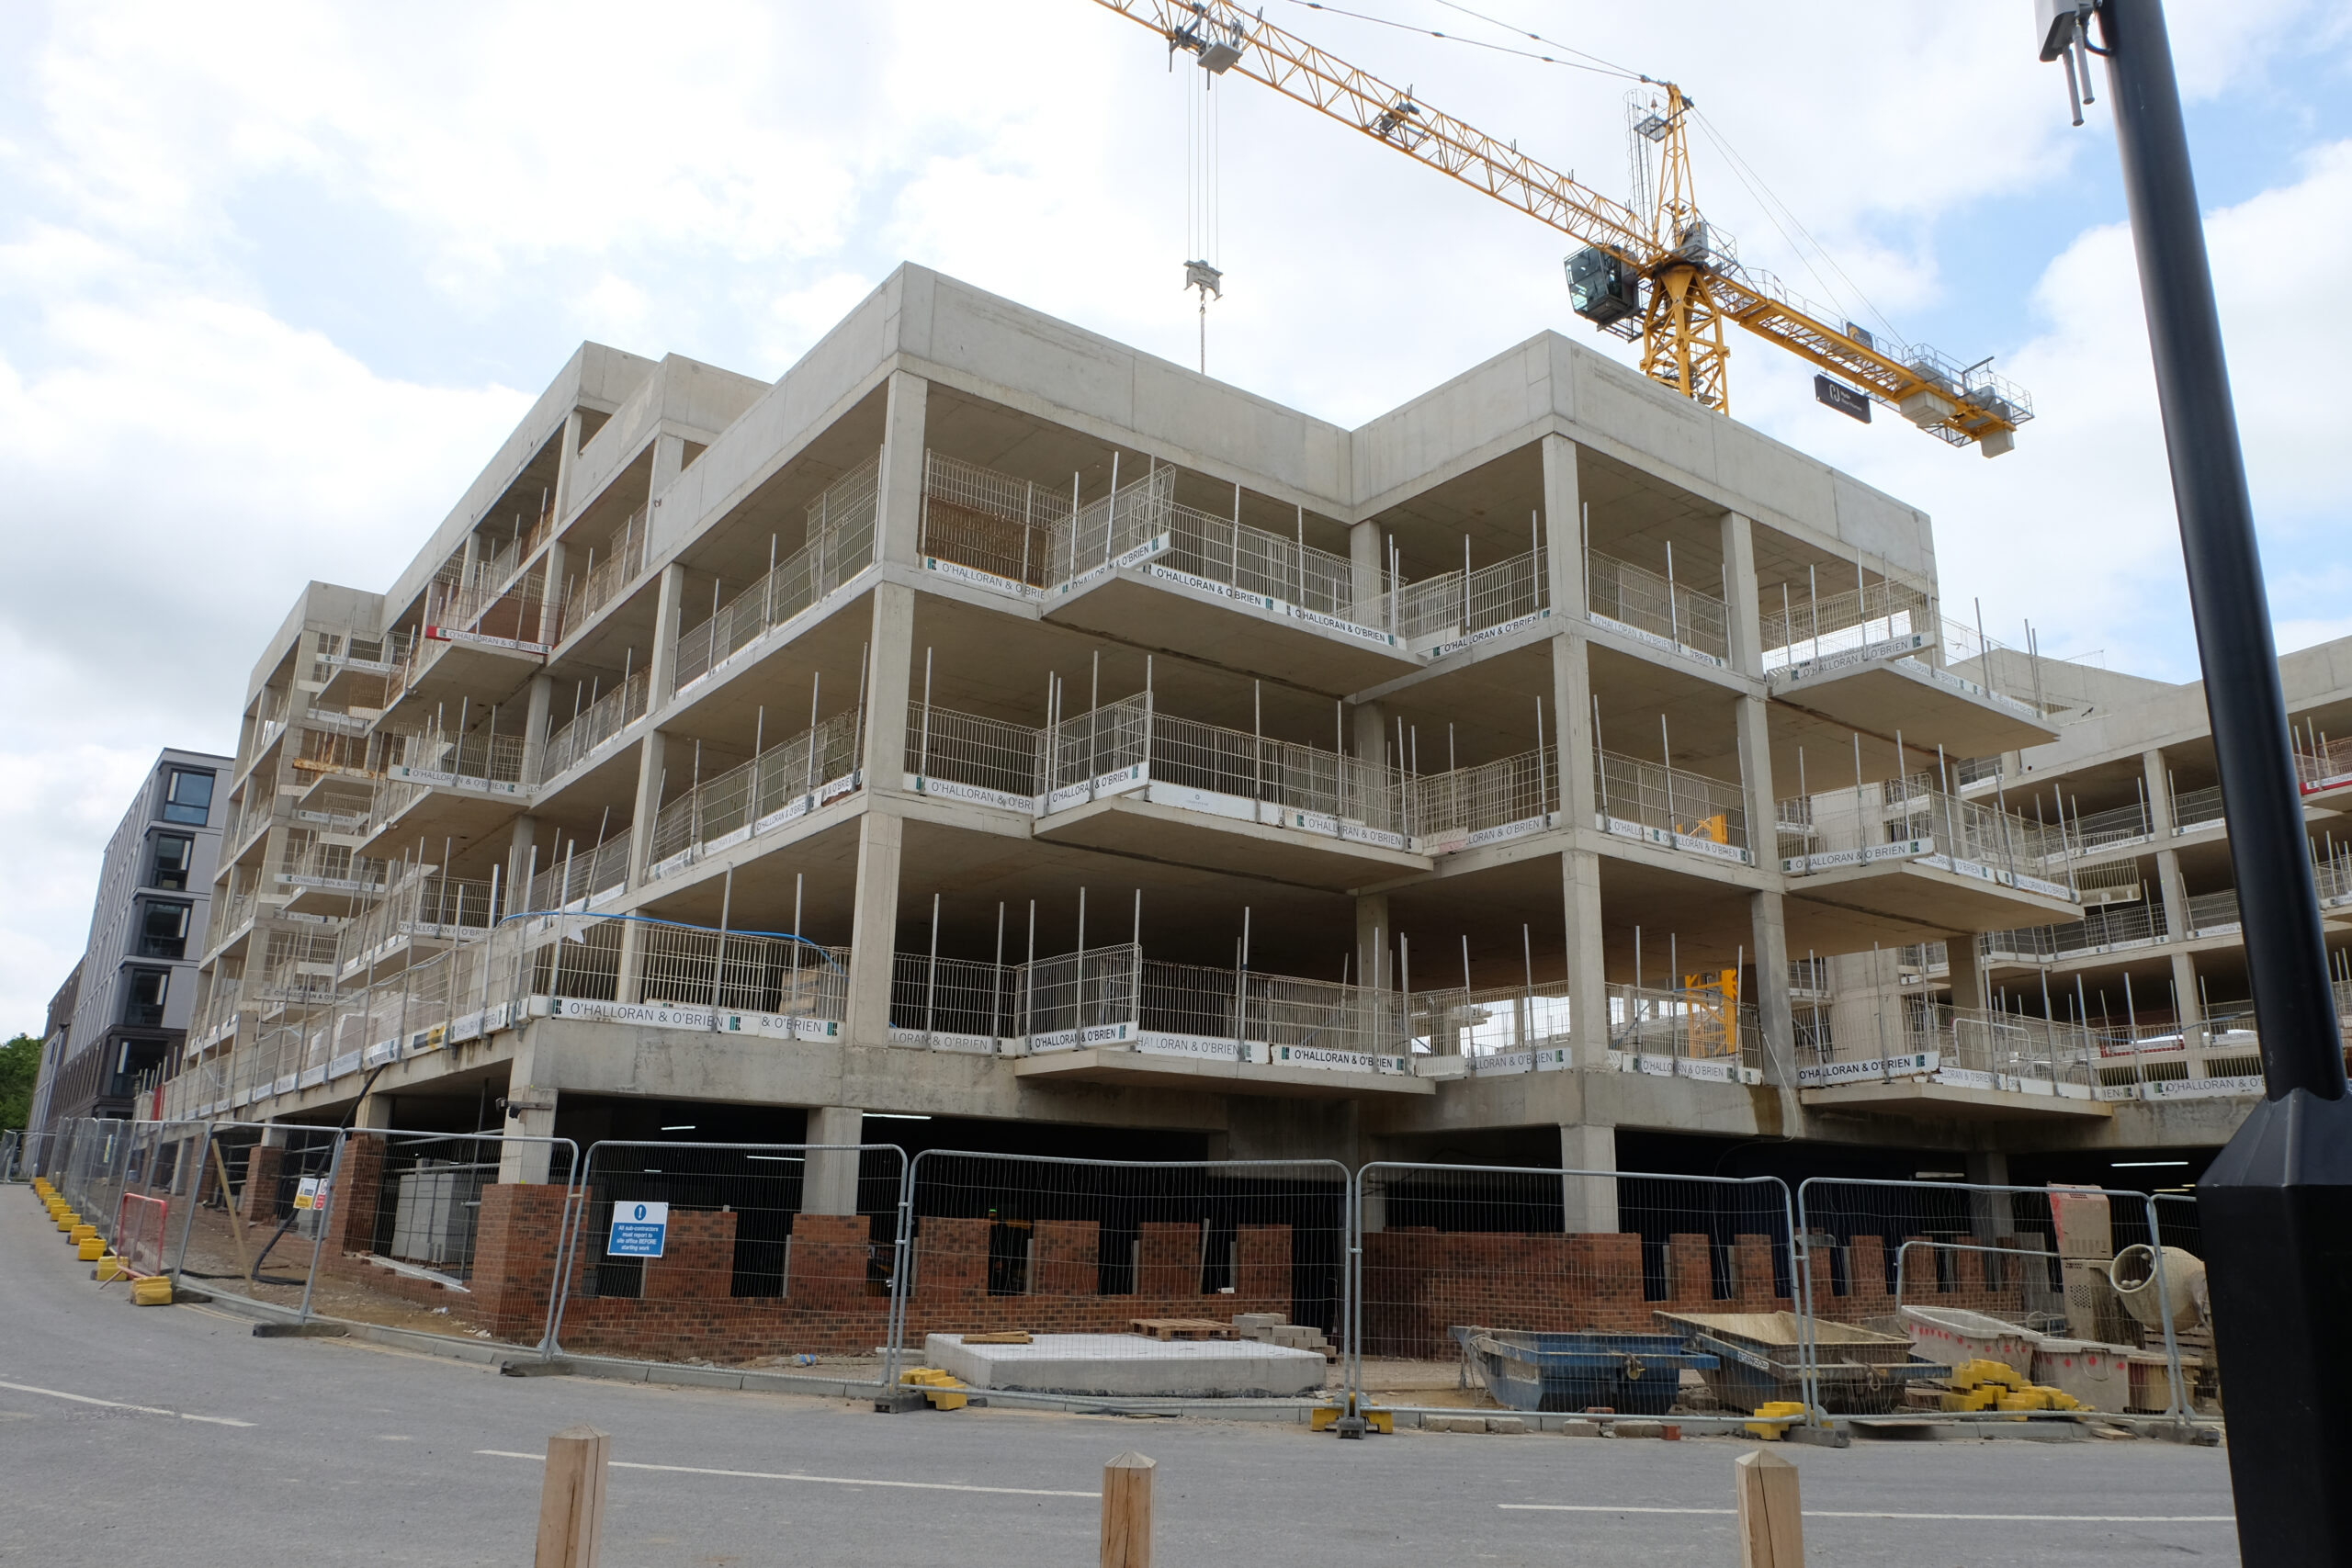 Building under construction at riverside square, canterbury